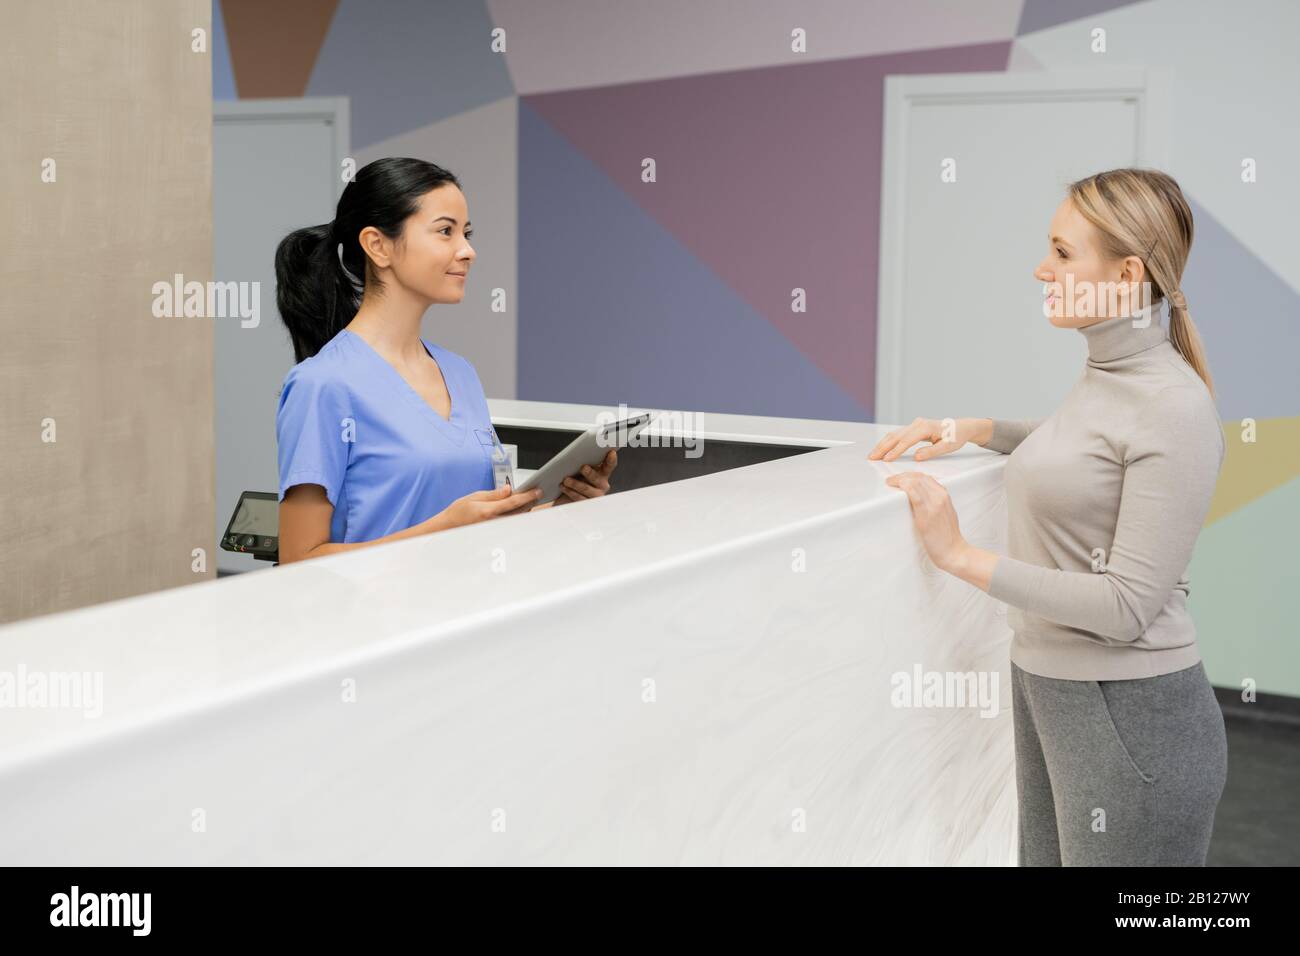 Young female assistant standing by reception counter and consulting patient Stock Photo